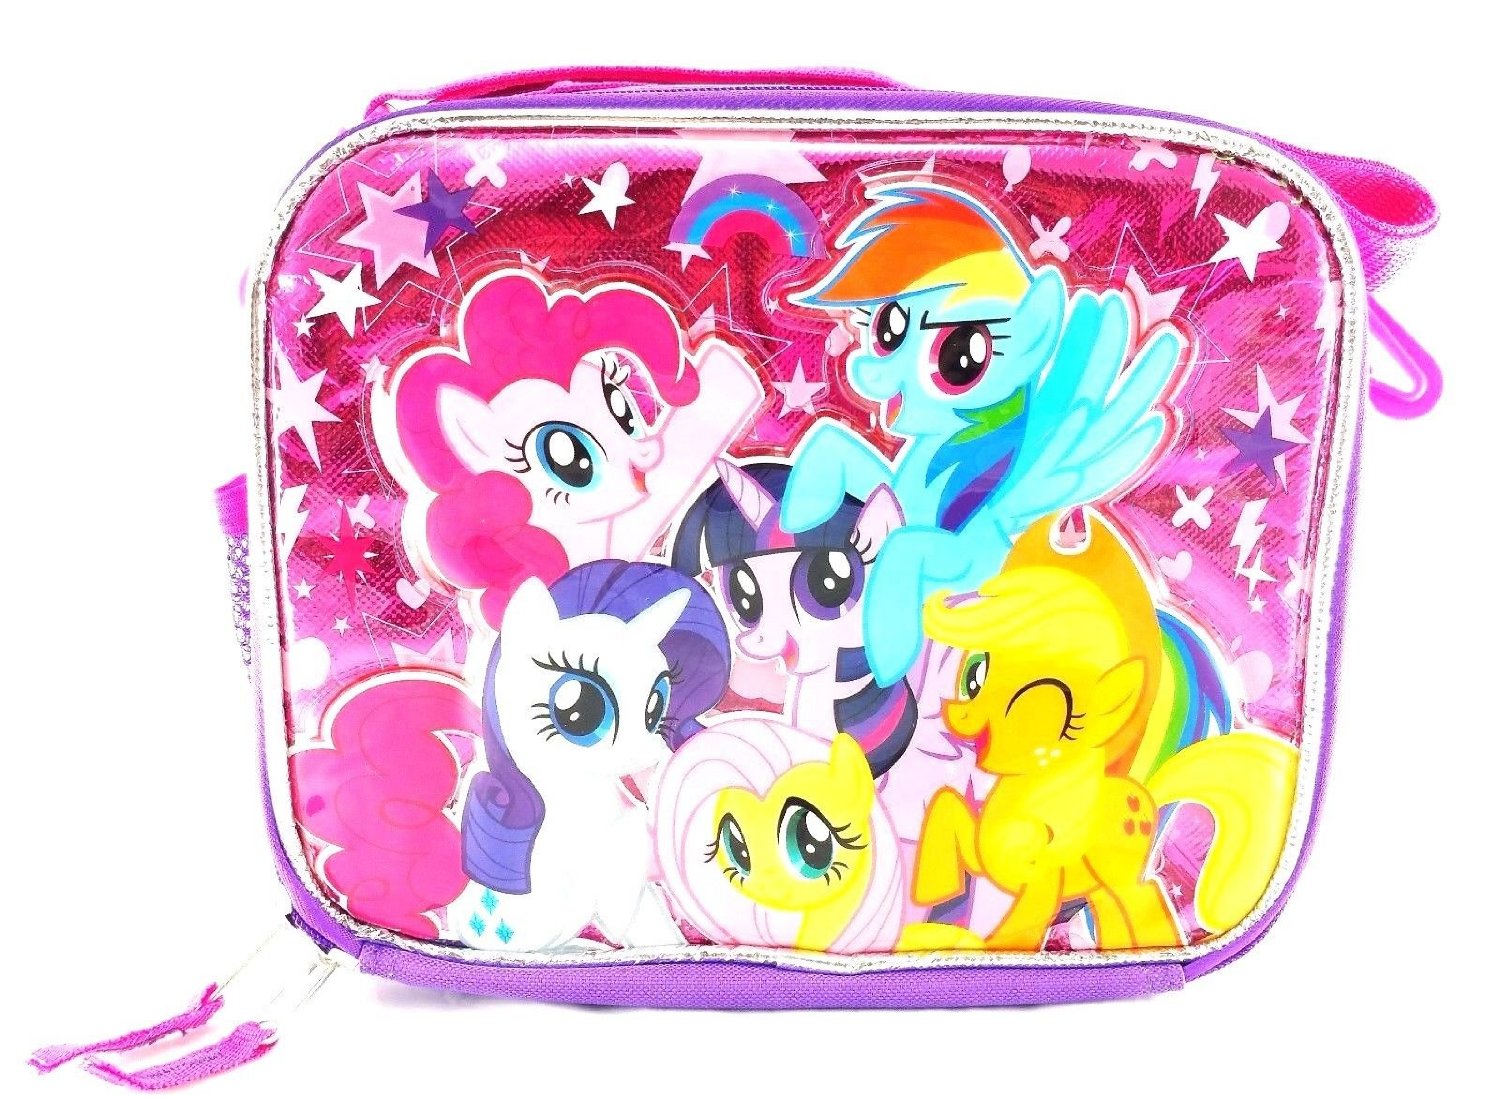 My Little Pony Kids Lunch Box Bag for Girls Unicorn Lunchbox Movie Cartoons Soft - image 1 of 2